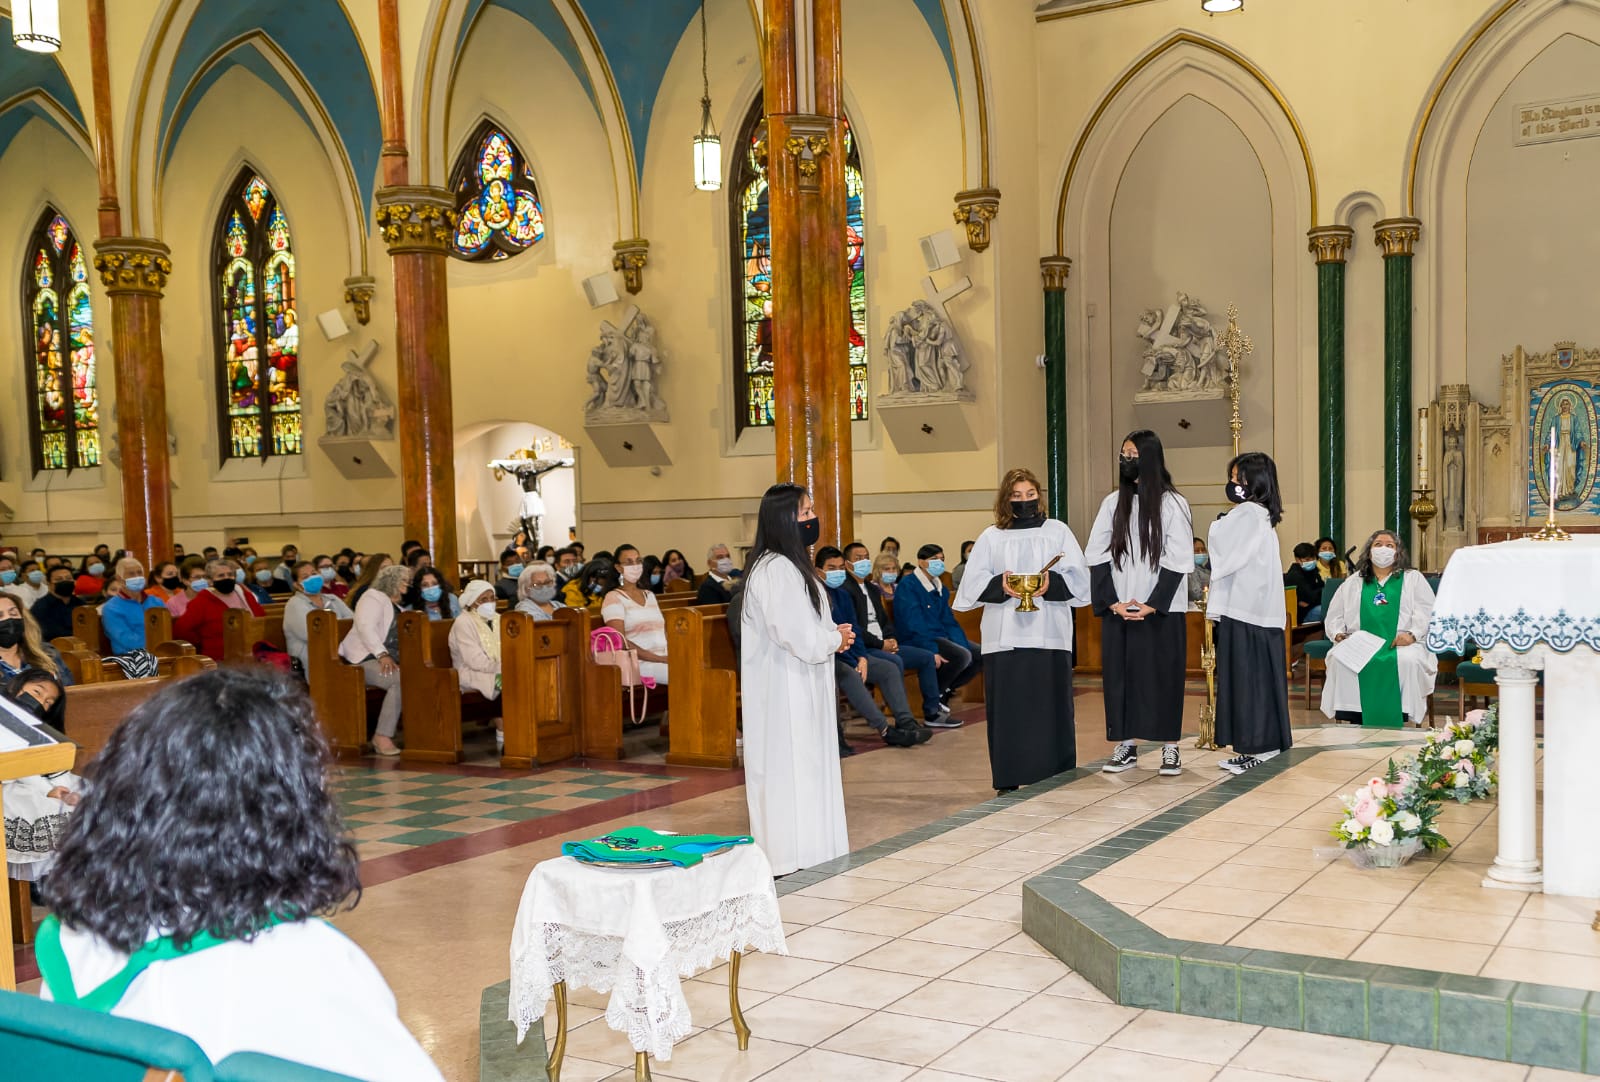 A group of people in white robes standing inside a church.